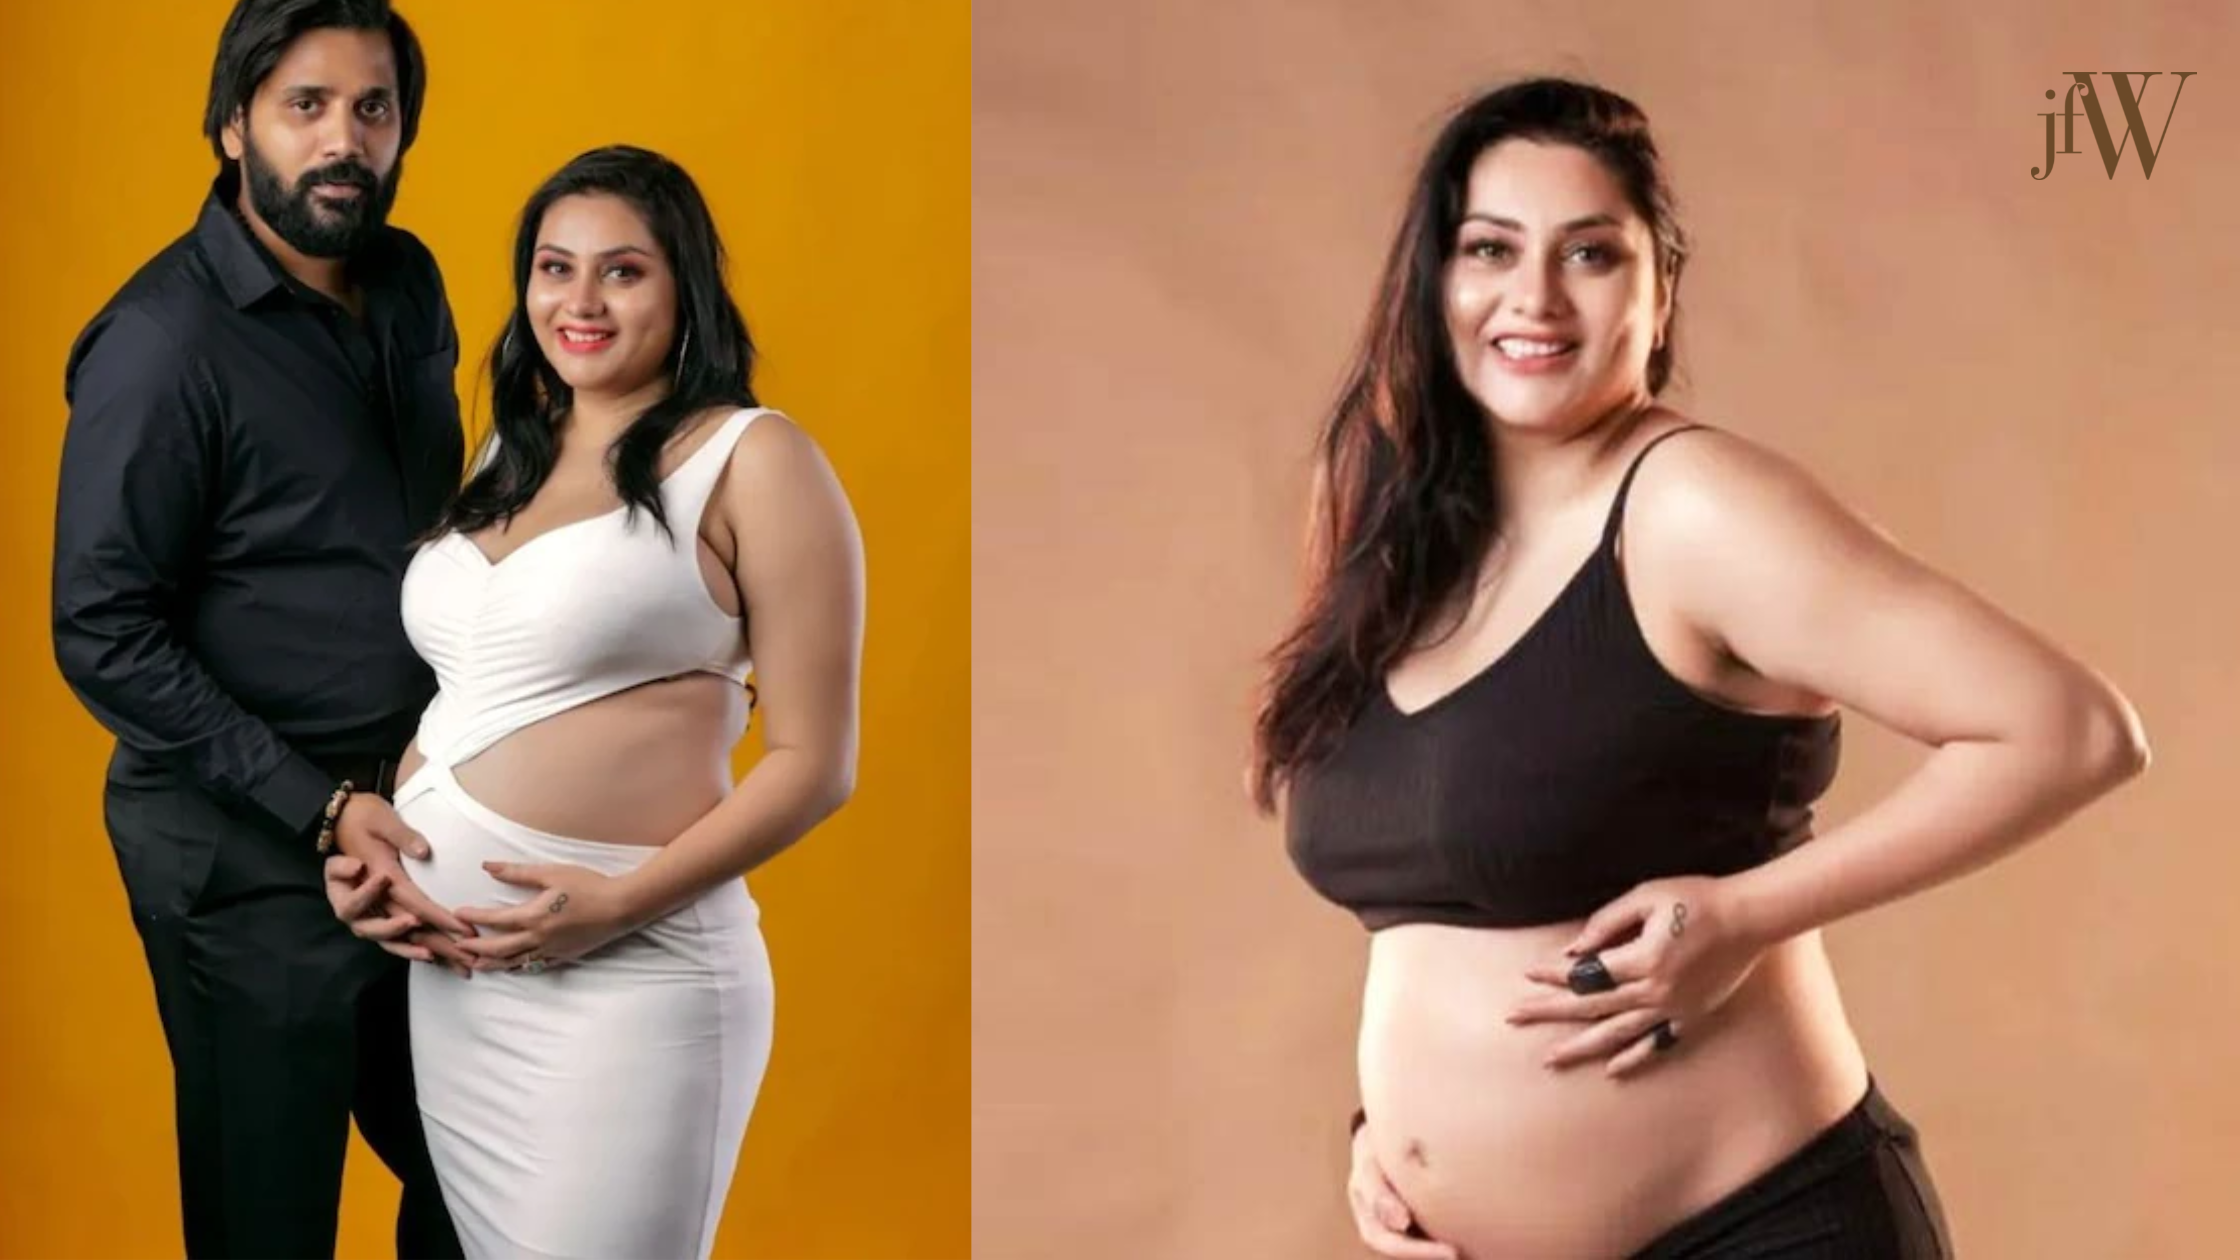 Tamil Namitha X Video - Actress Namita blessed with twins! Watch Video! | JFW Just for women